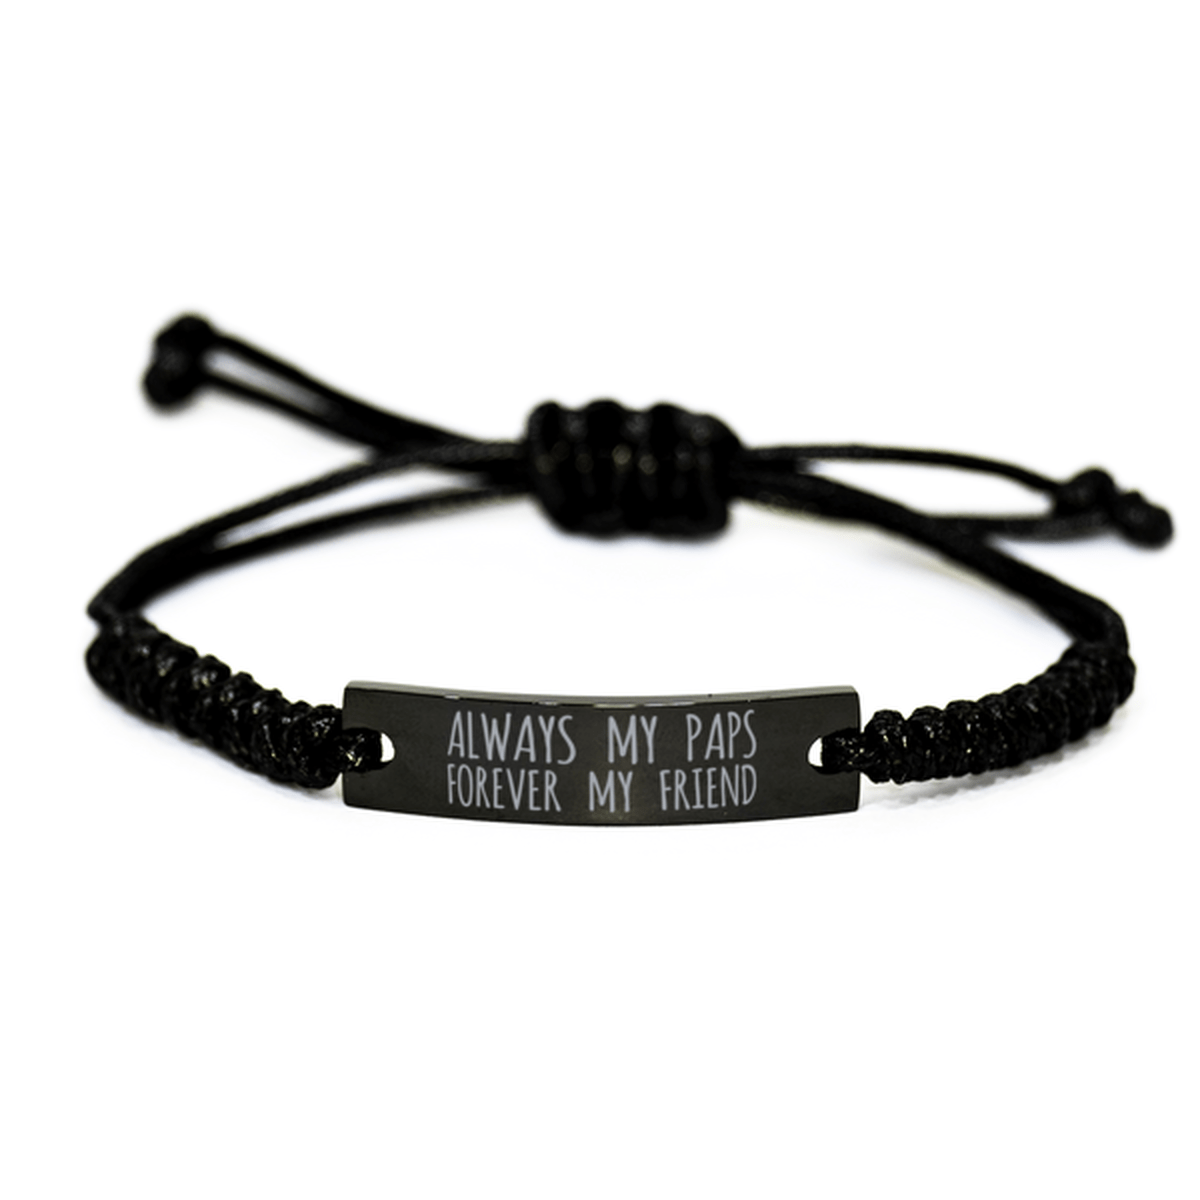 Inspirational Paps Black Rope Bracelet, Always My Paps Forever My Friend, Best Birthday Gifts For Family